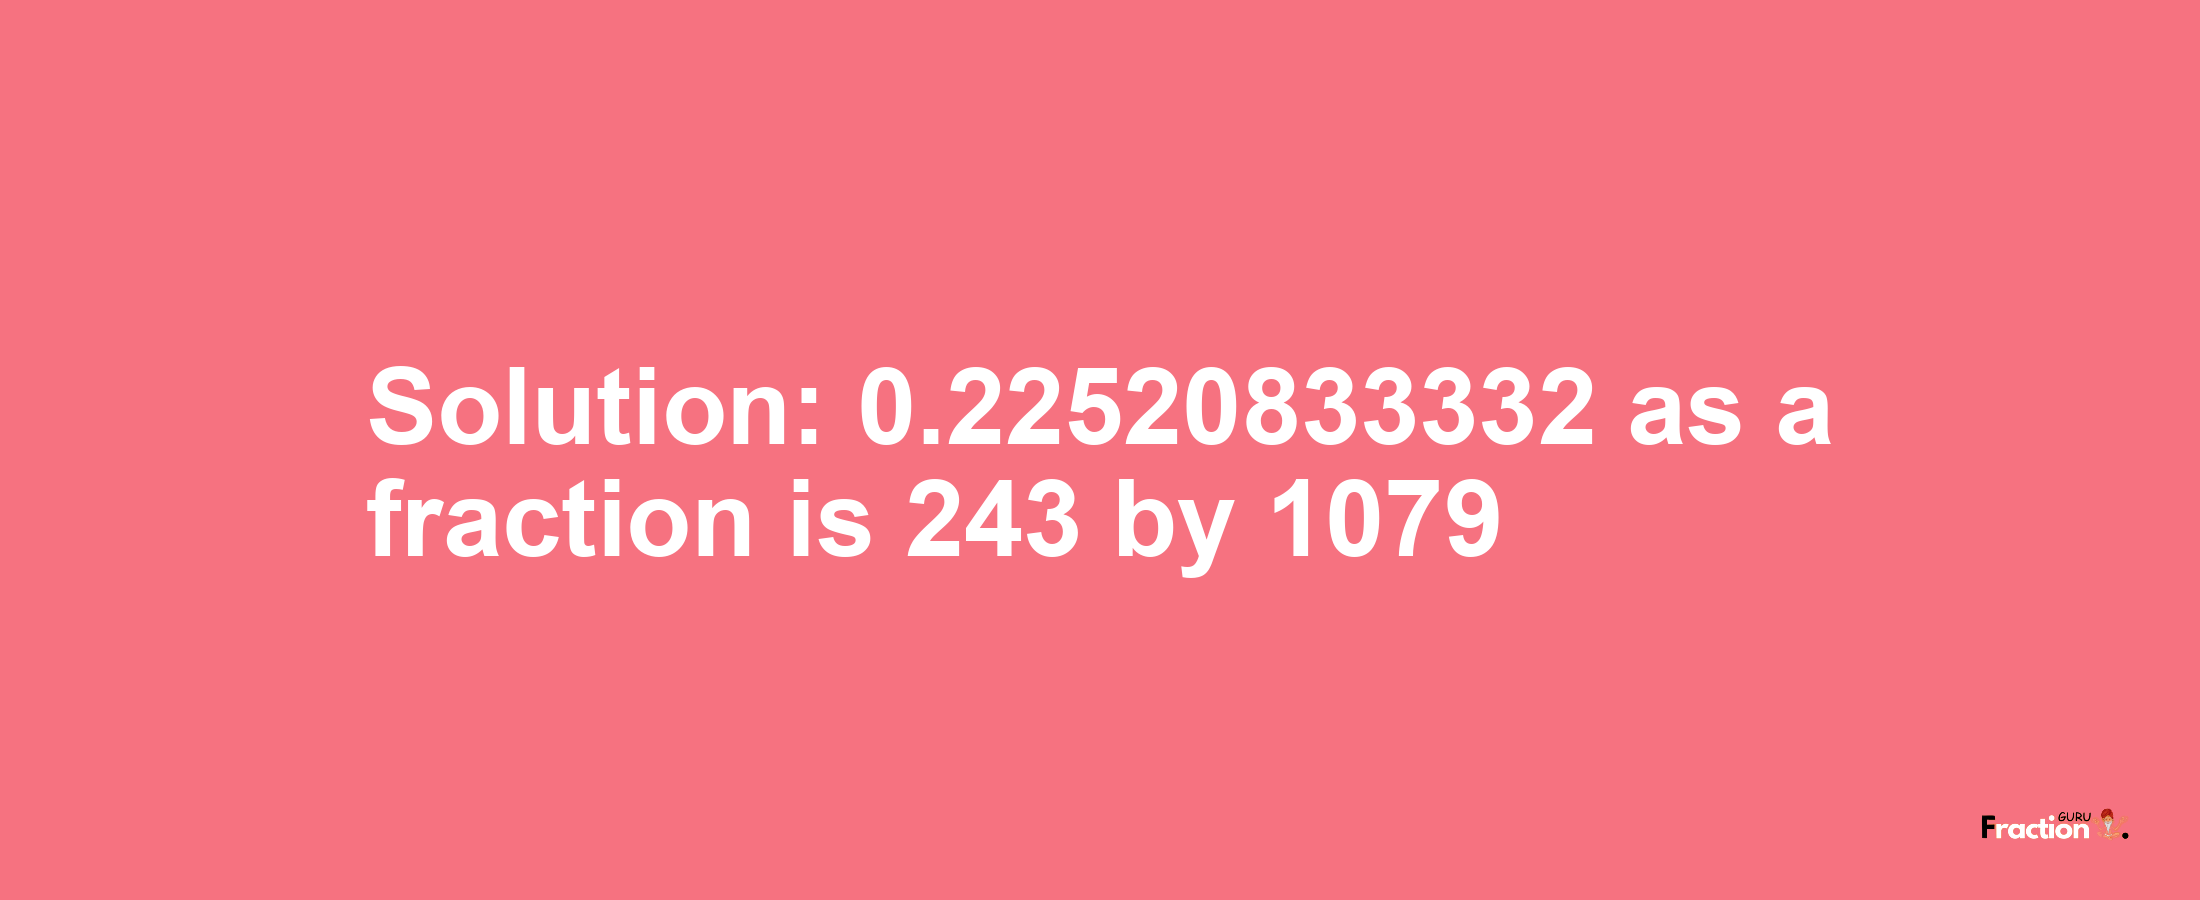 Solution:0.22520833332 as a fraction is 243/1079